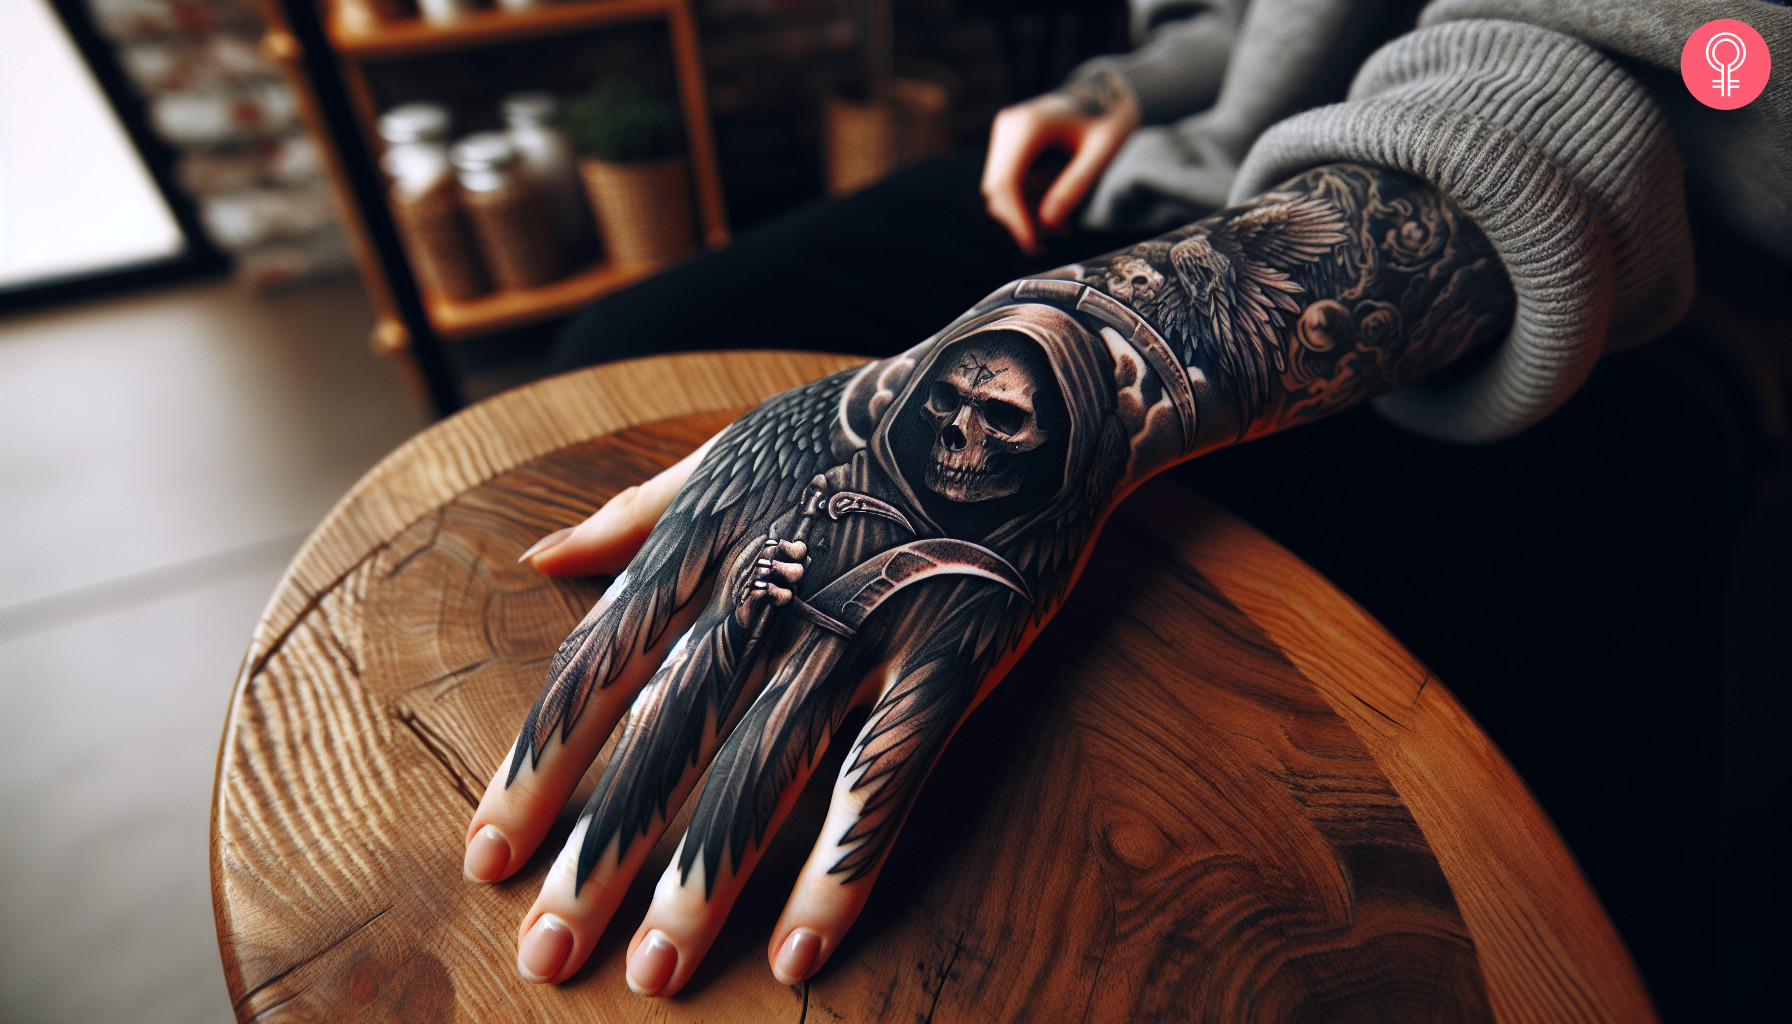 An angel of death tattoo on the hand